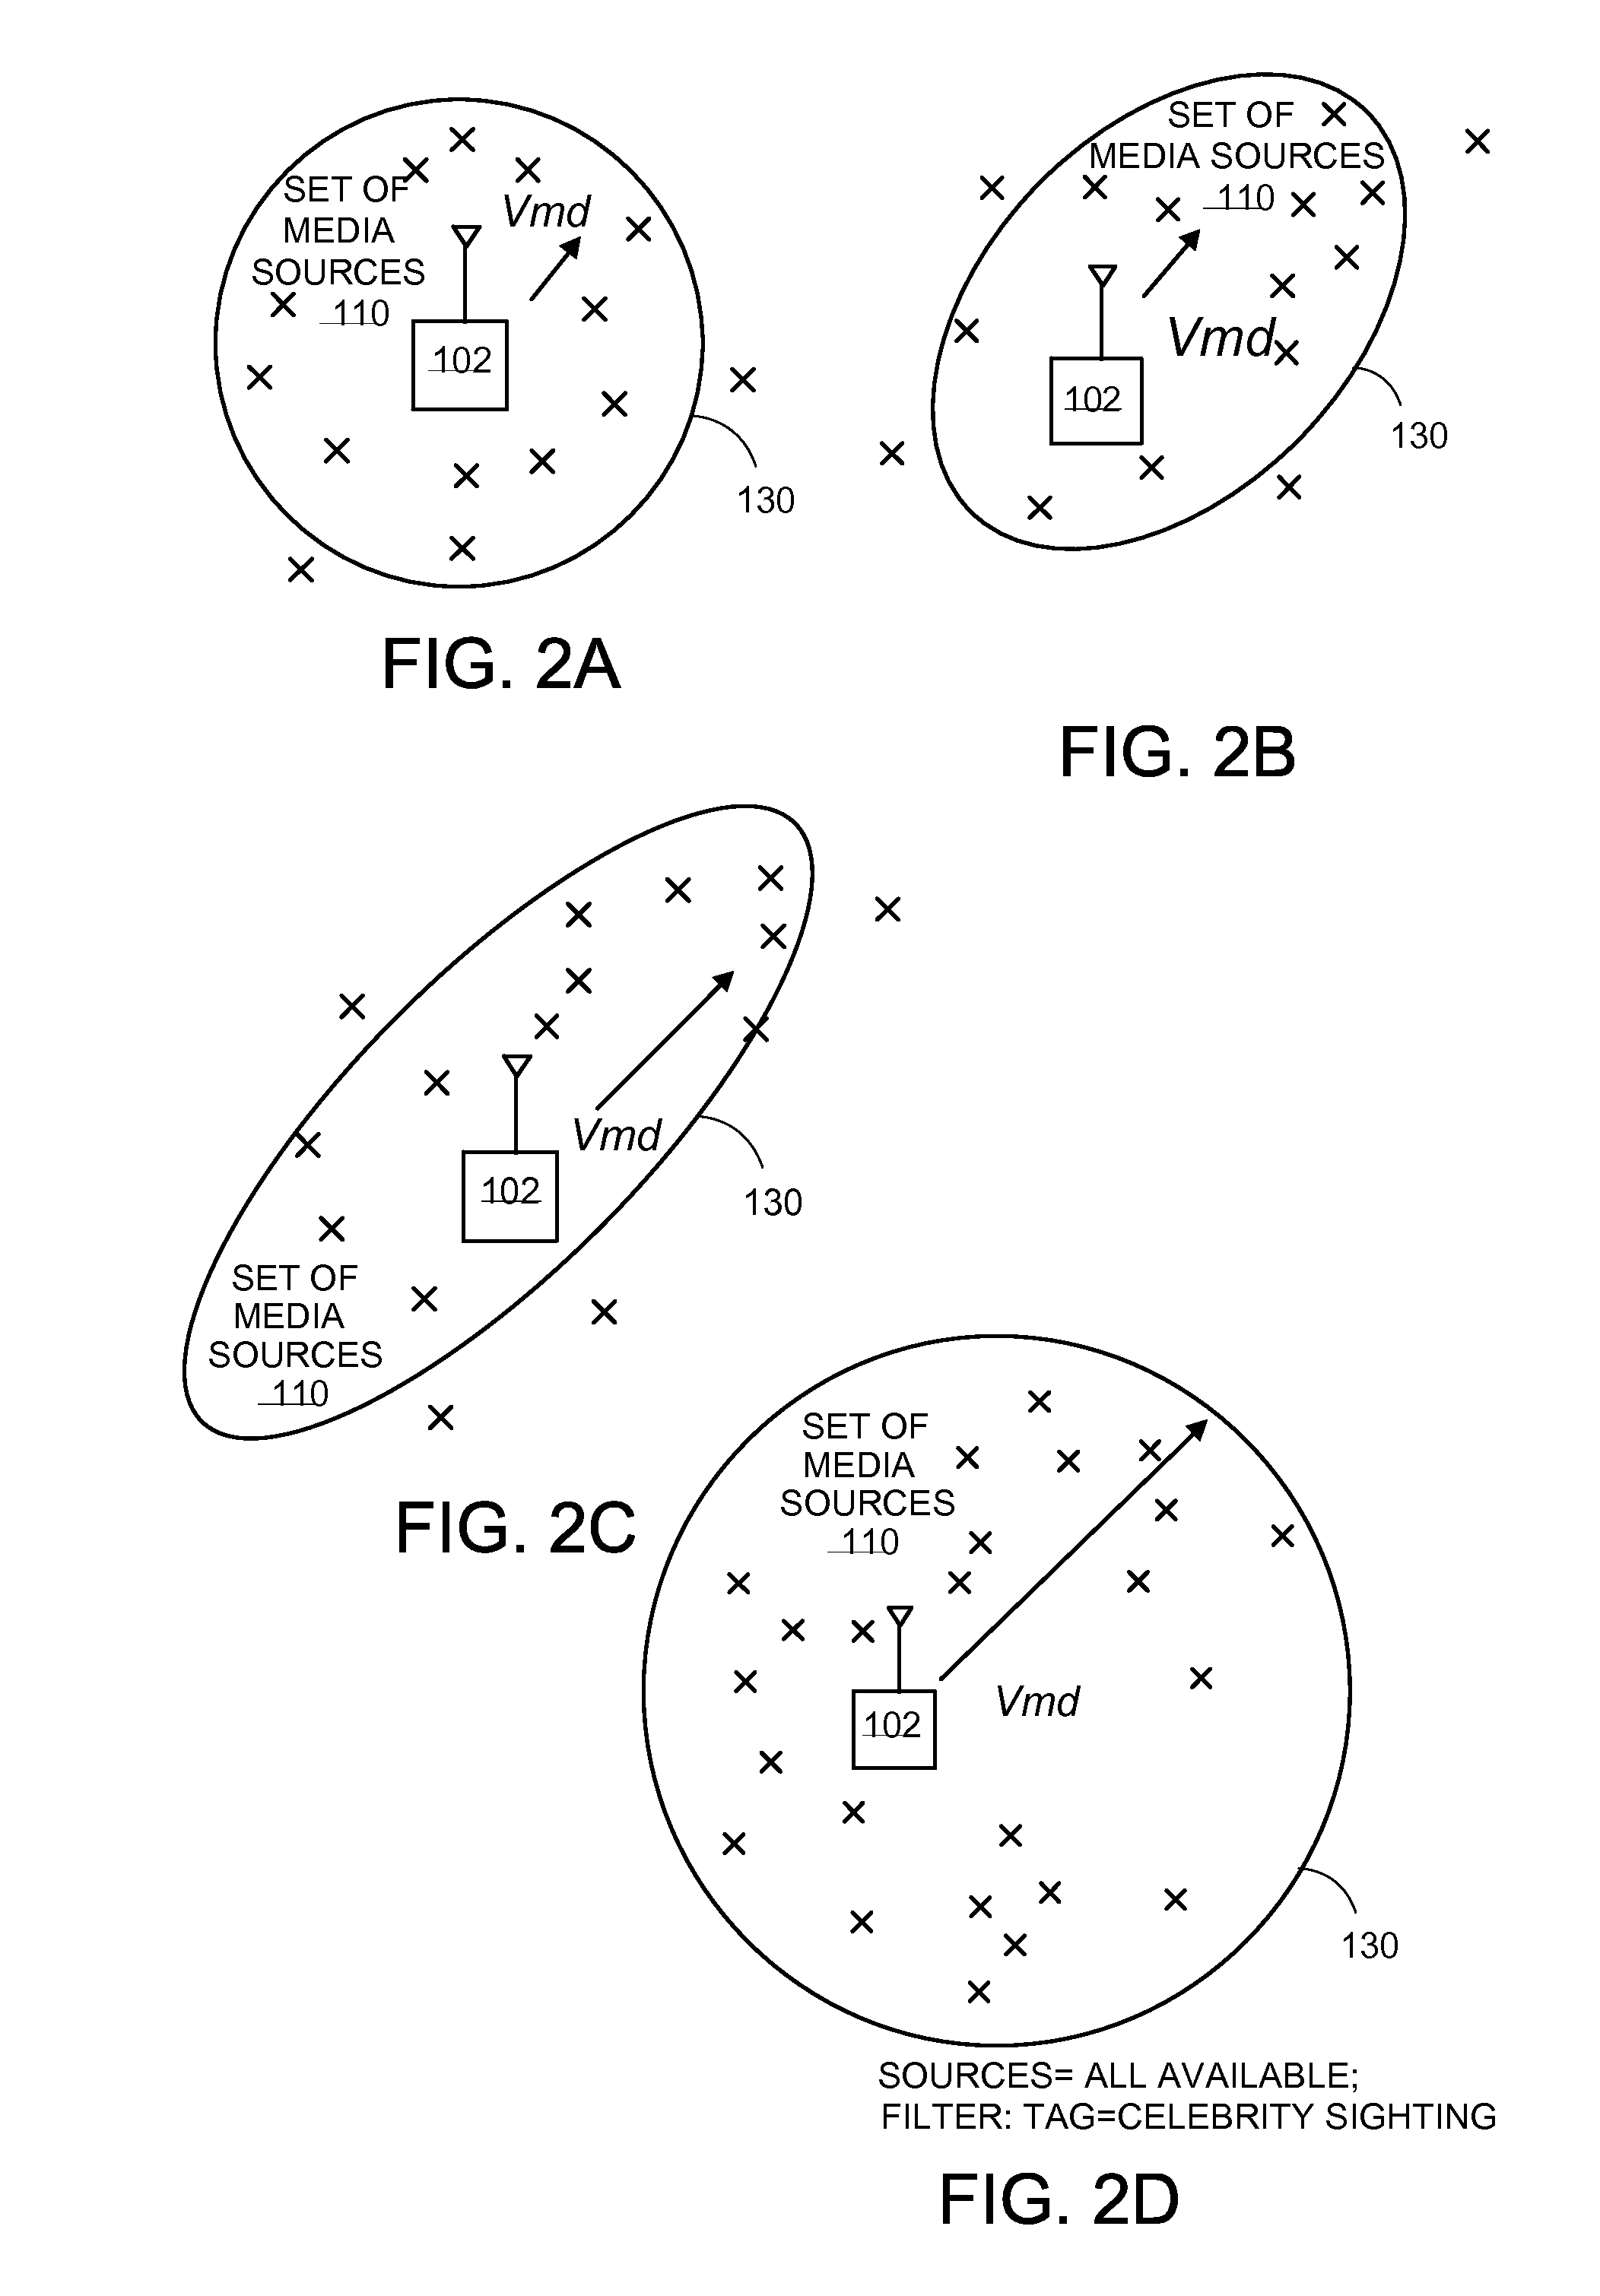 Systems and methods for generating a selective distribution of media content feeds